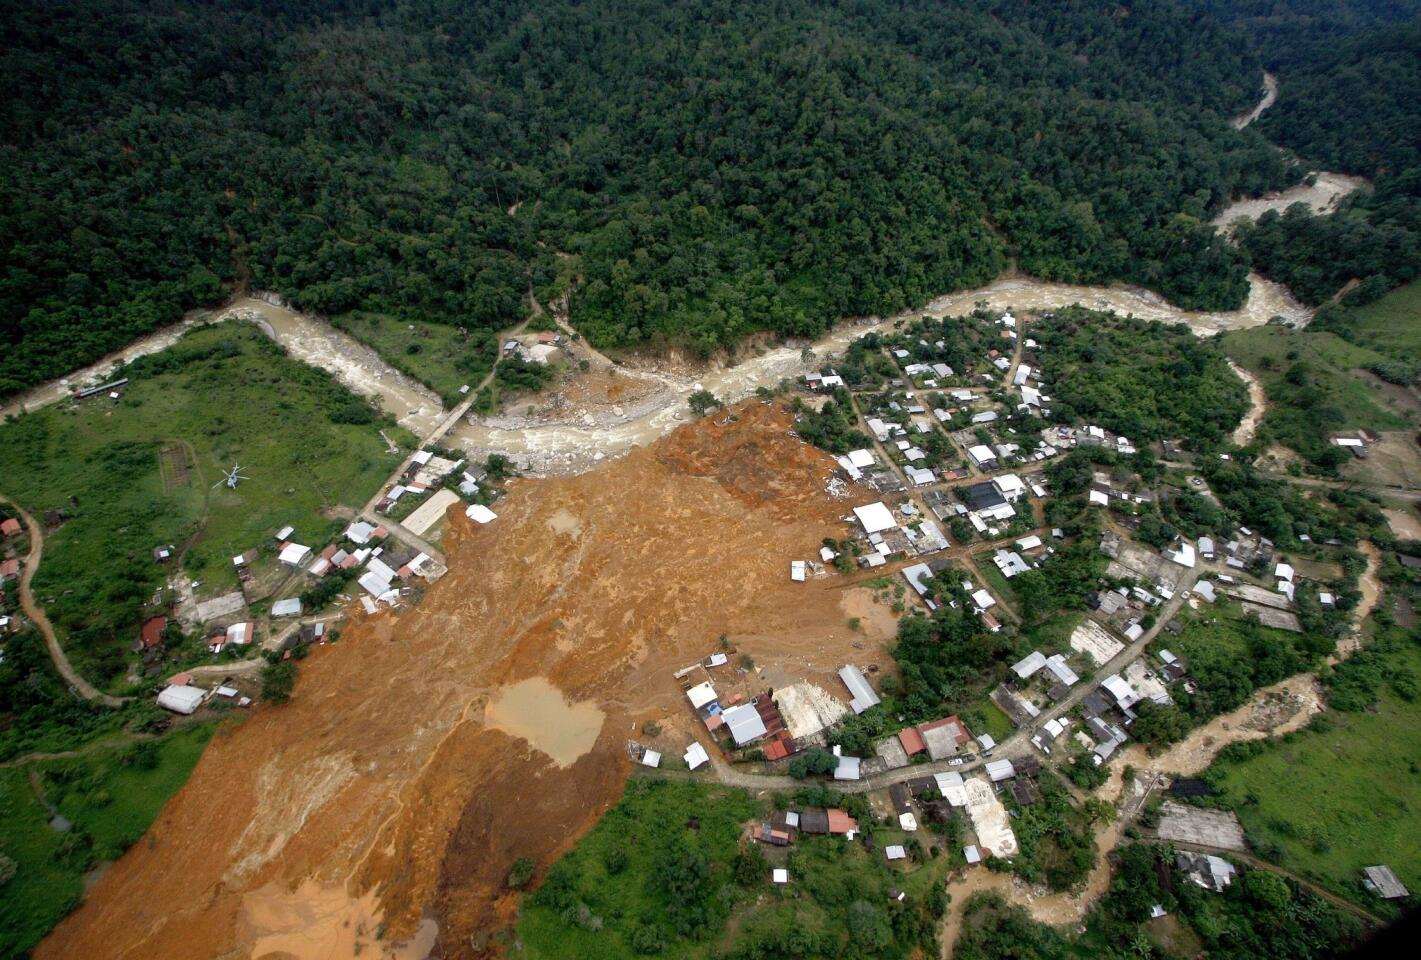 An aerial view of the landslide that buried part of the Mexican village of La Pintada. Remaining structures can be seen on both sides of the spot where the hill gave way, leaving dozens of people missing.